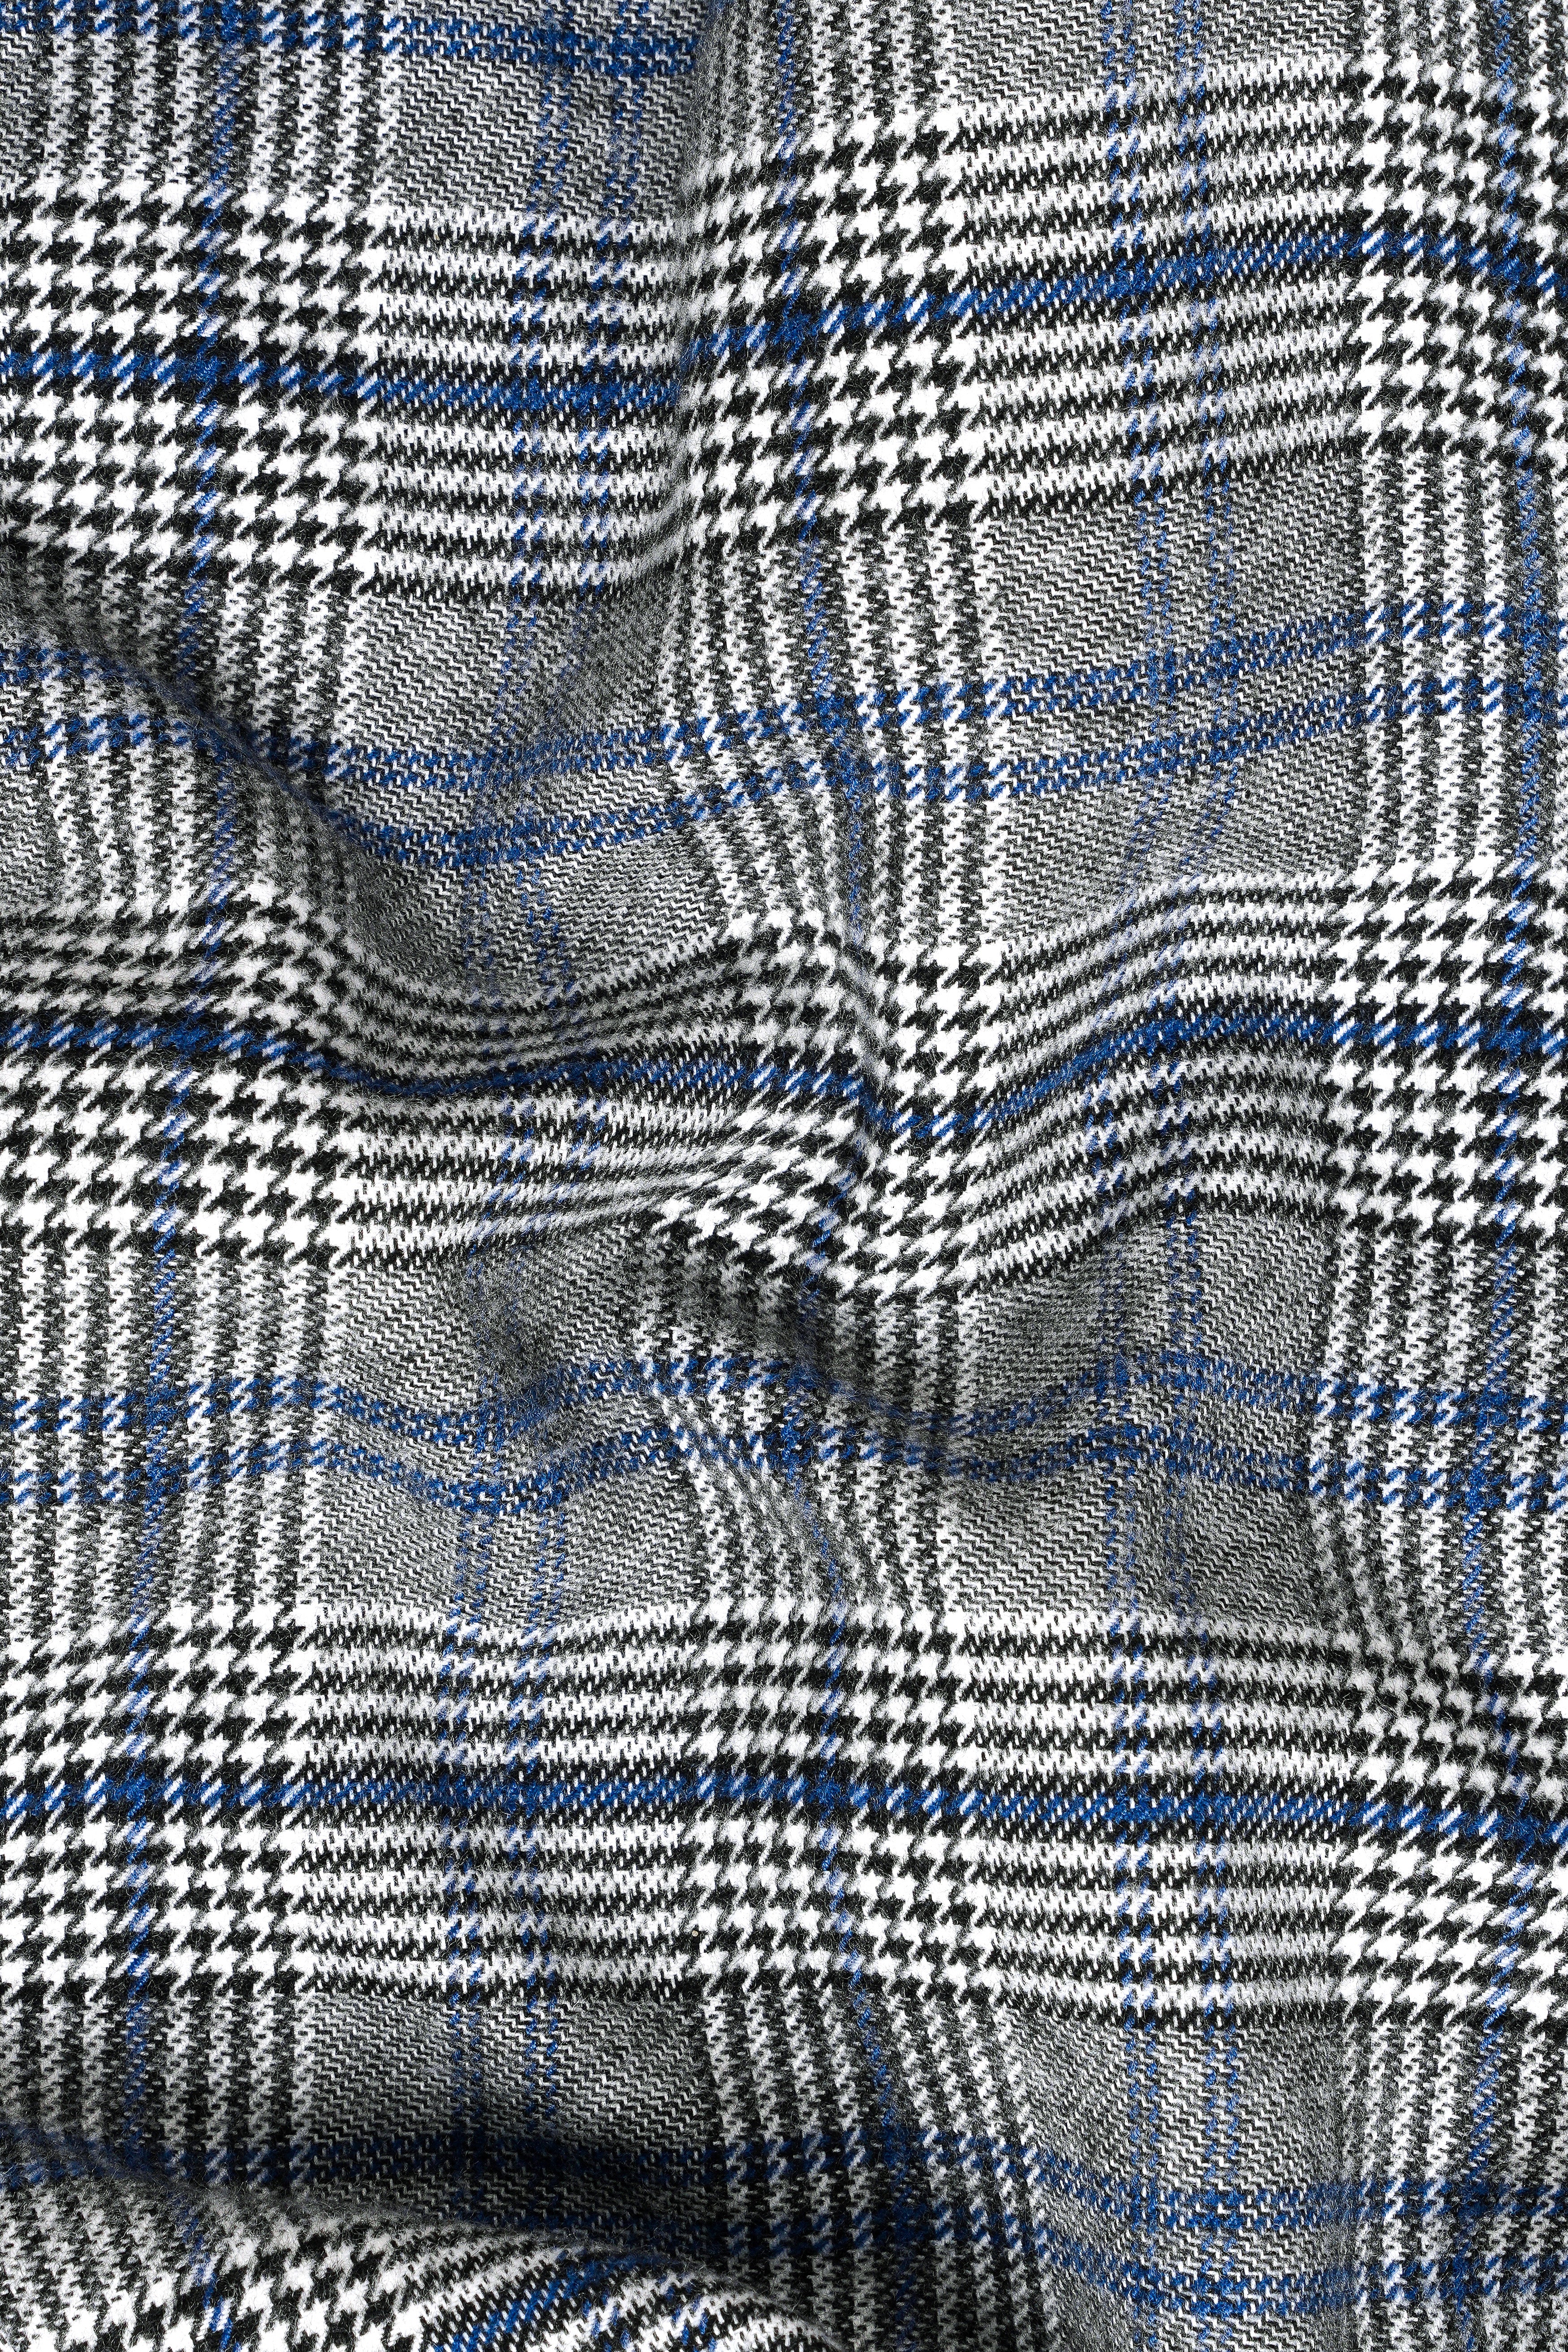 Chalice Gray and Chathams Blue Plaid Houndstooth Tweed Pant T3027-28, T3027-30, T3027-32, T3027-34, T3027-36, T3027-38, T3027-40, T3027-42, T3027-44